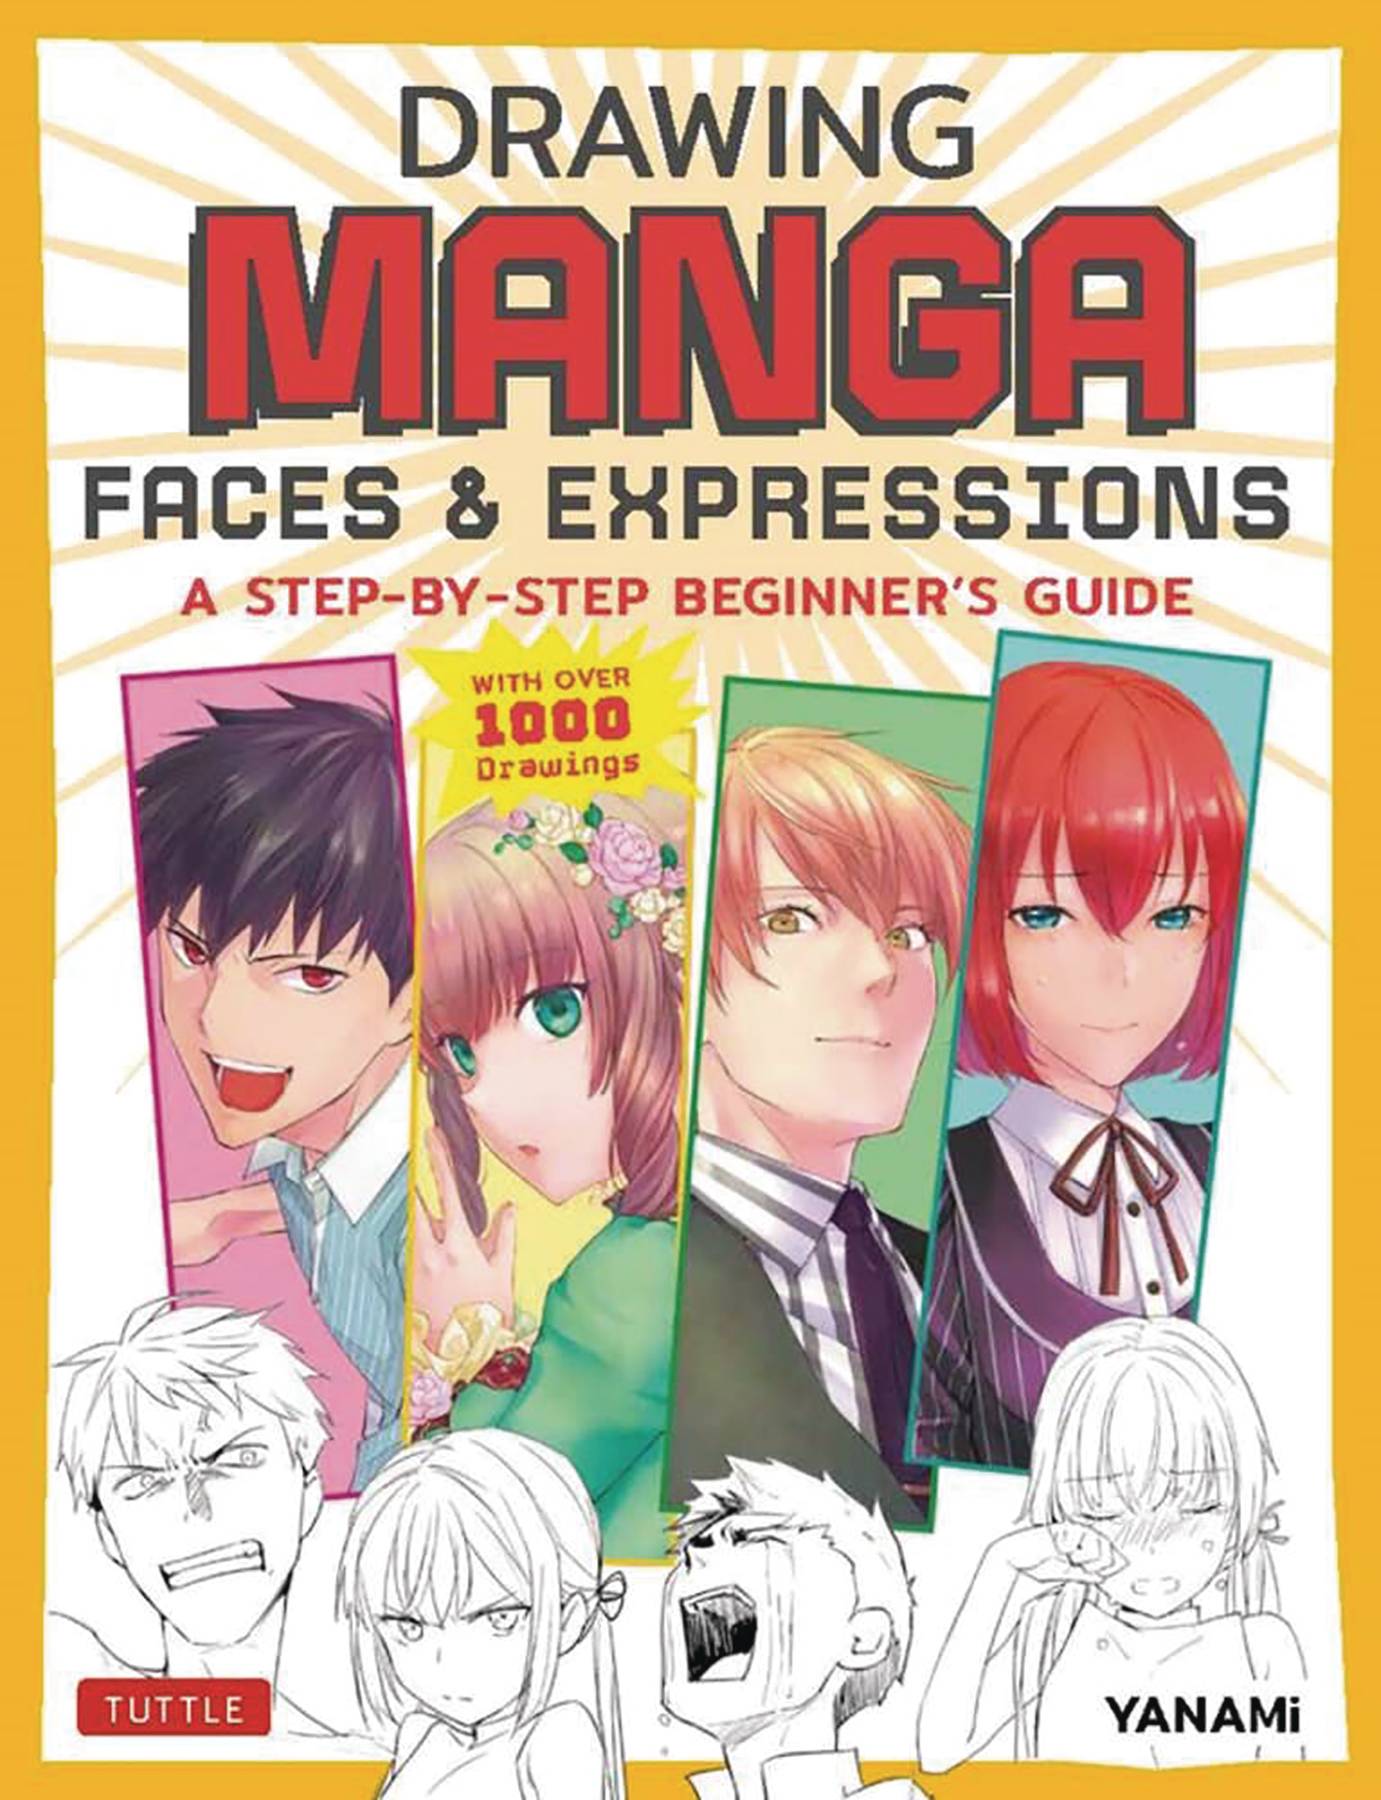 DRAWING MANGA FACES & EXPRESSIONS SC